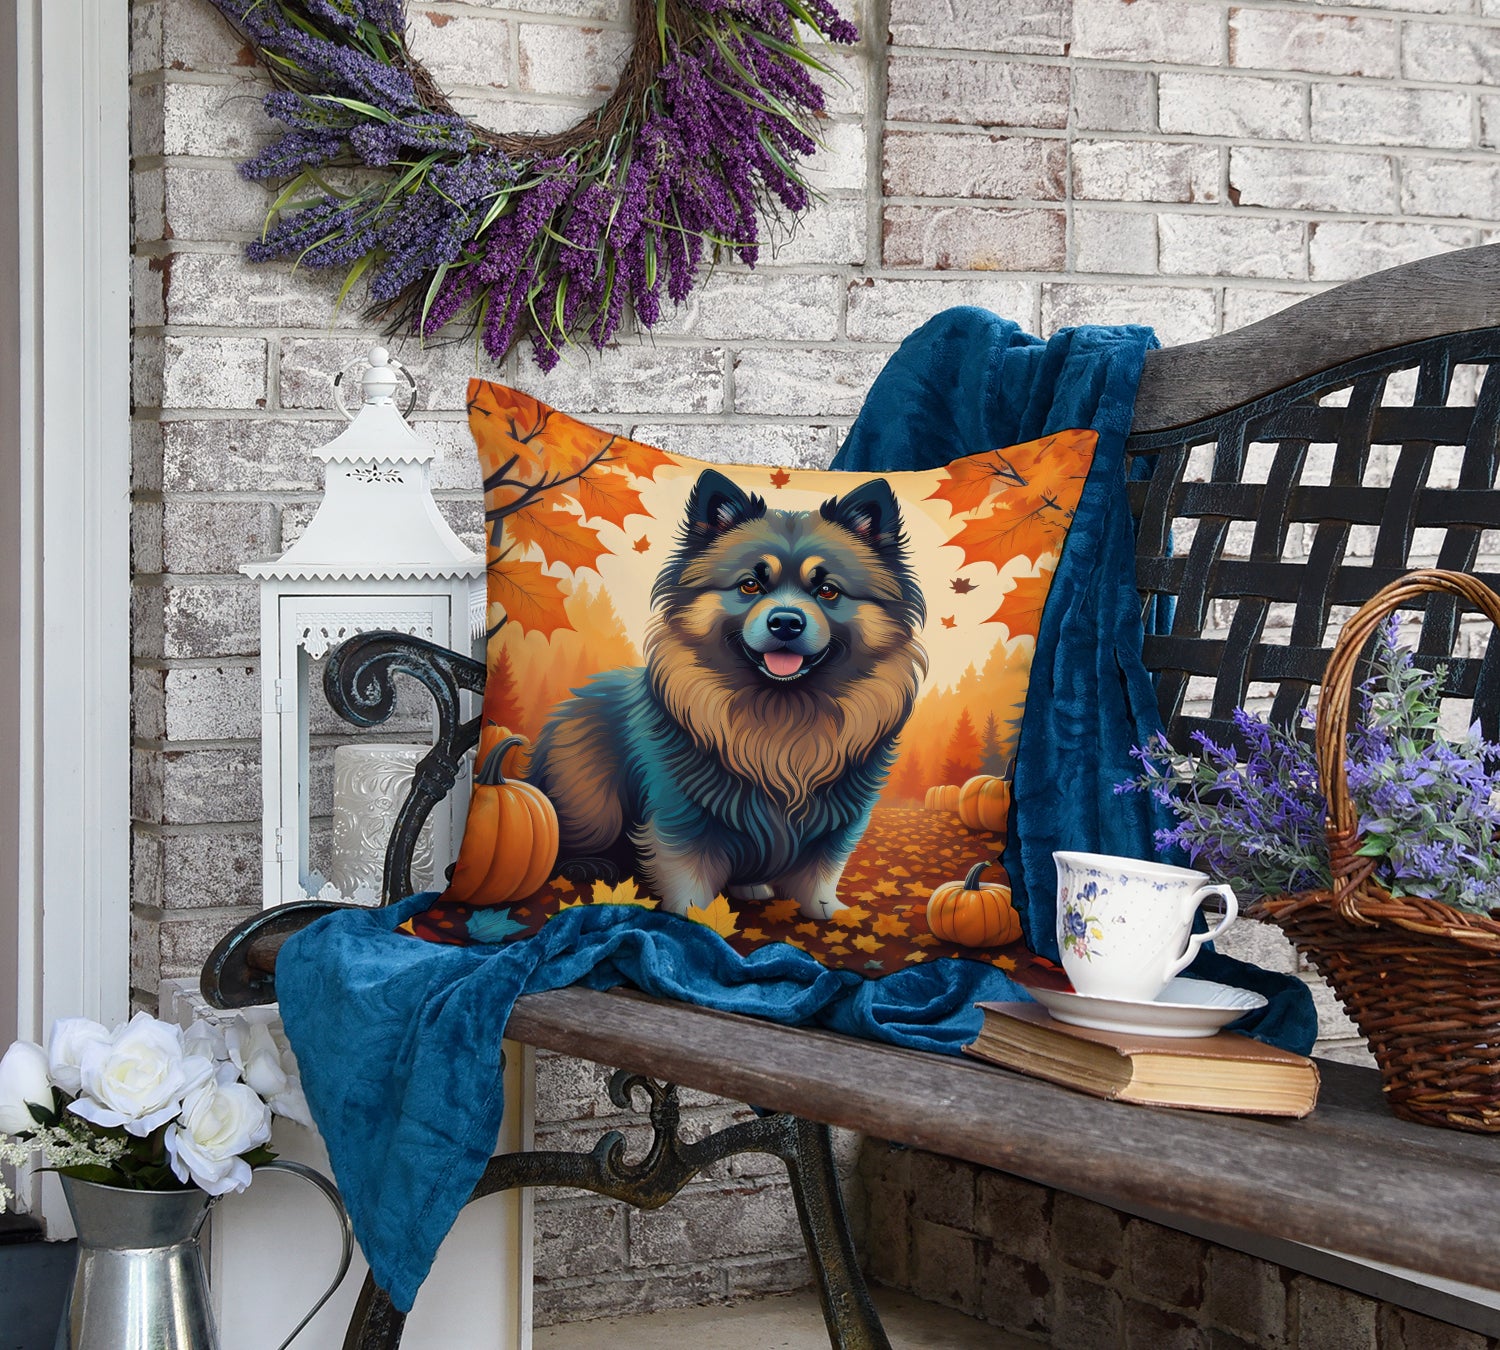 Buy this Keeshond Fall Fabric Decorative Pillow